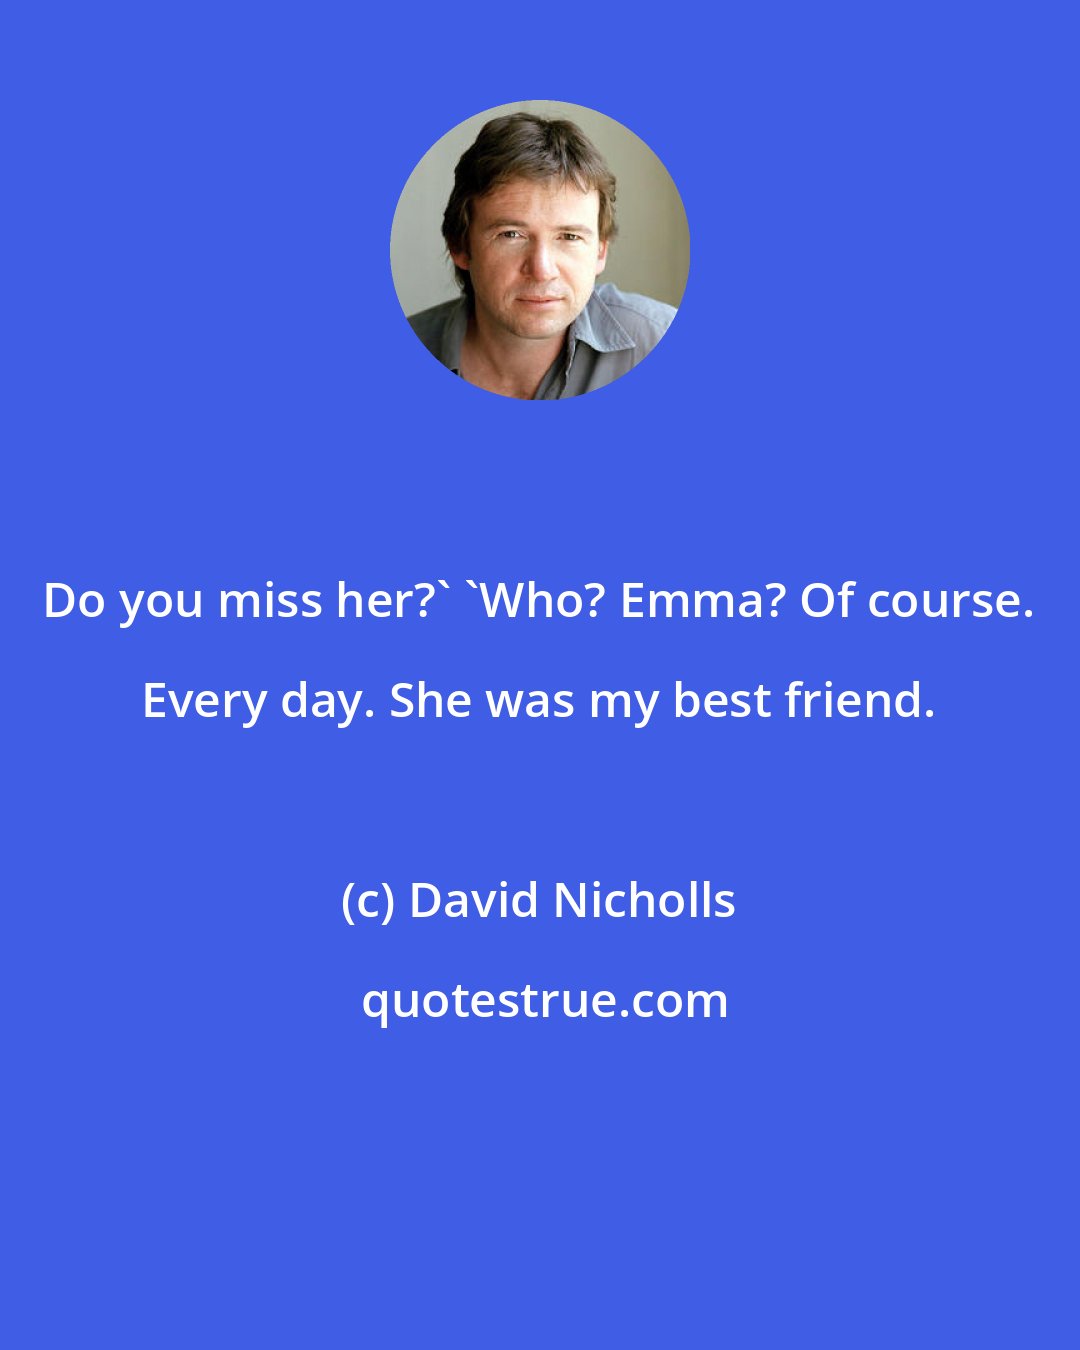 David Nicholls: Do you miss her?' 'Who? Emma? Of course. Every day. She was my best friend.